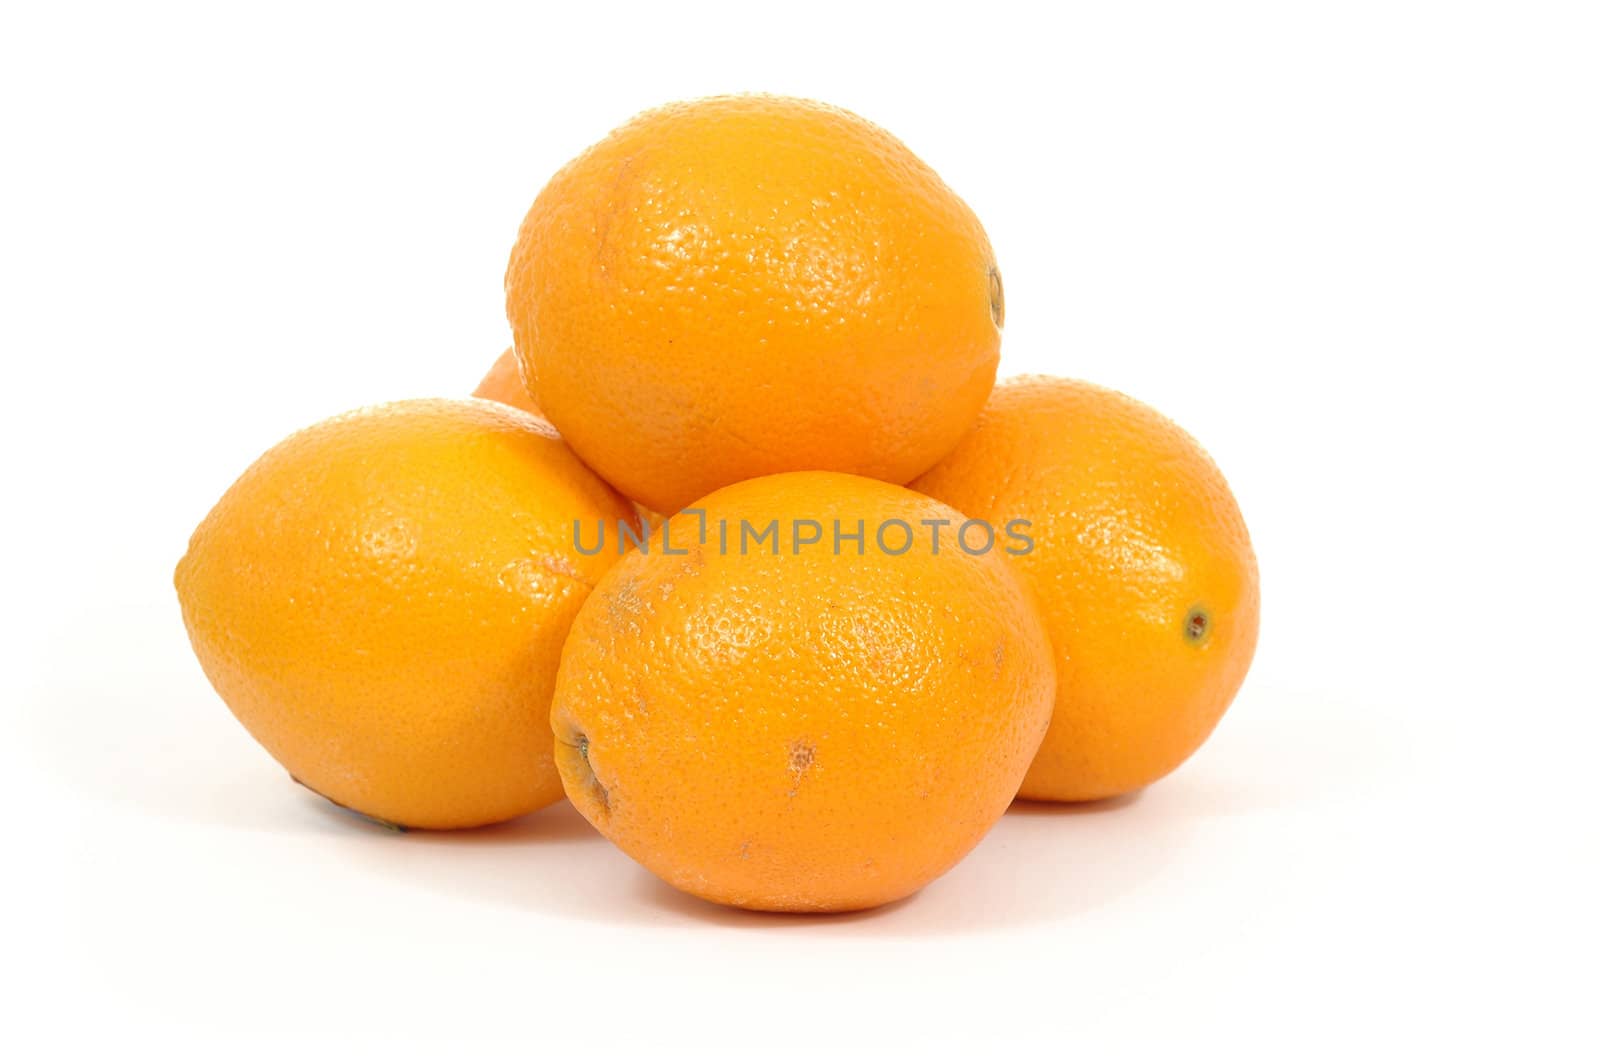 Pile of oranges. The oranges are taken on a white background.